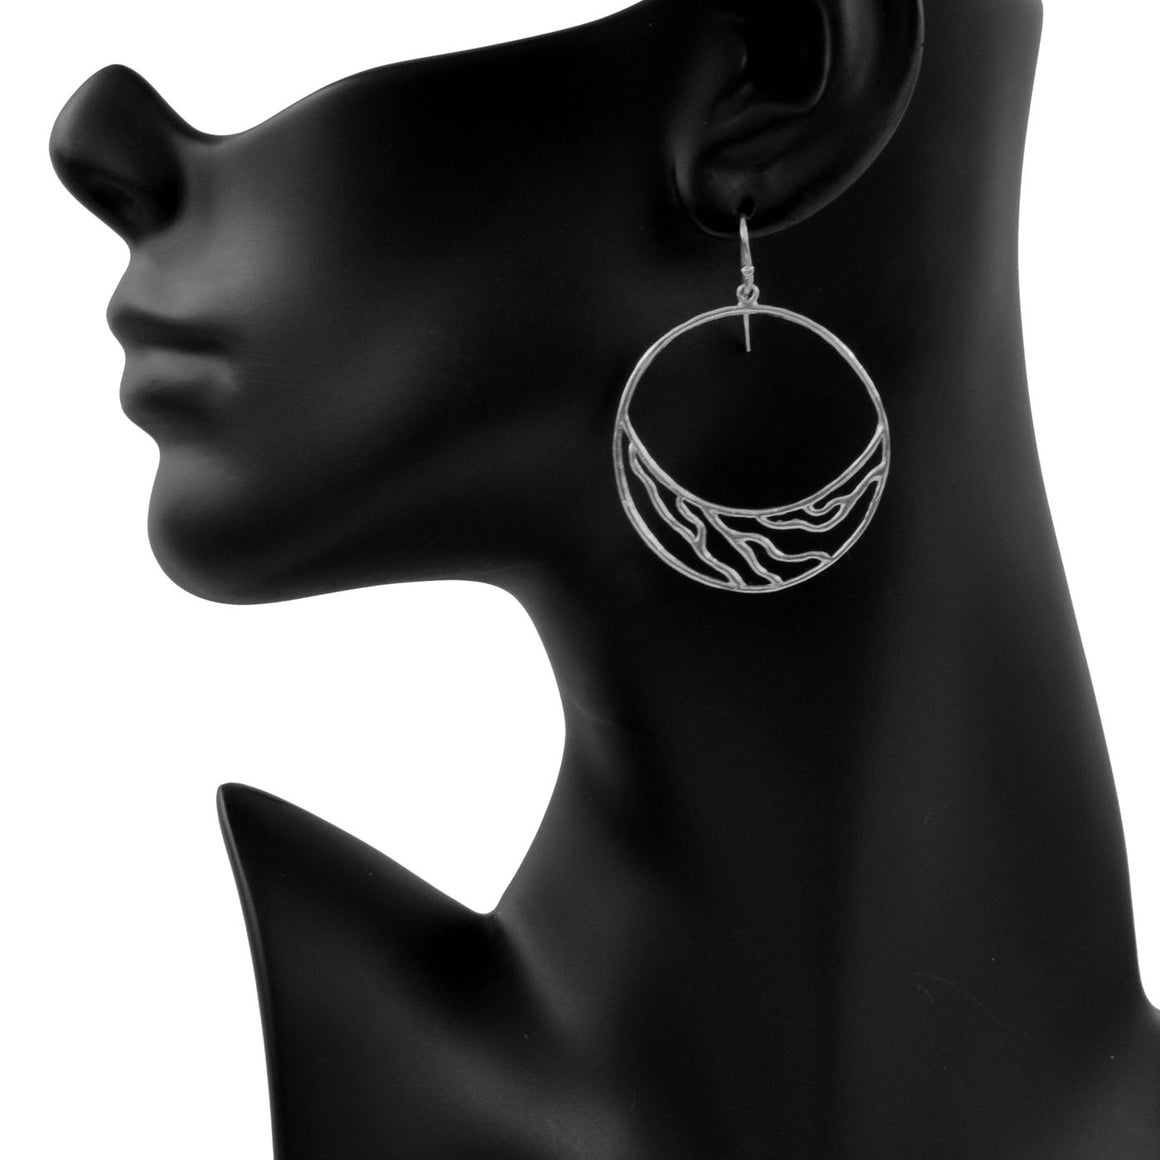 Intricate Branches Crescent Hoop Earrings - Platinum Silver